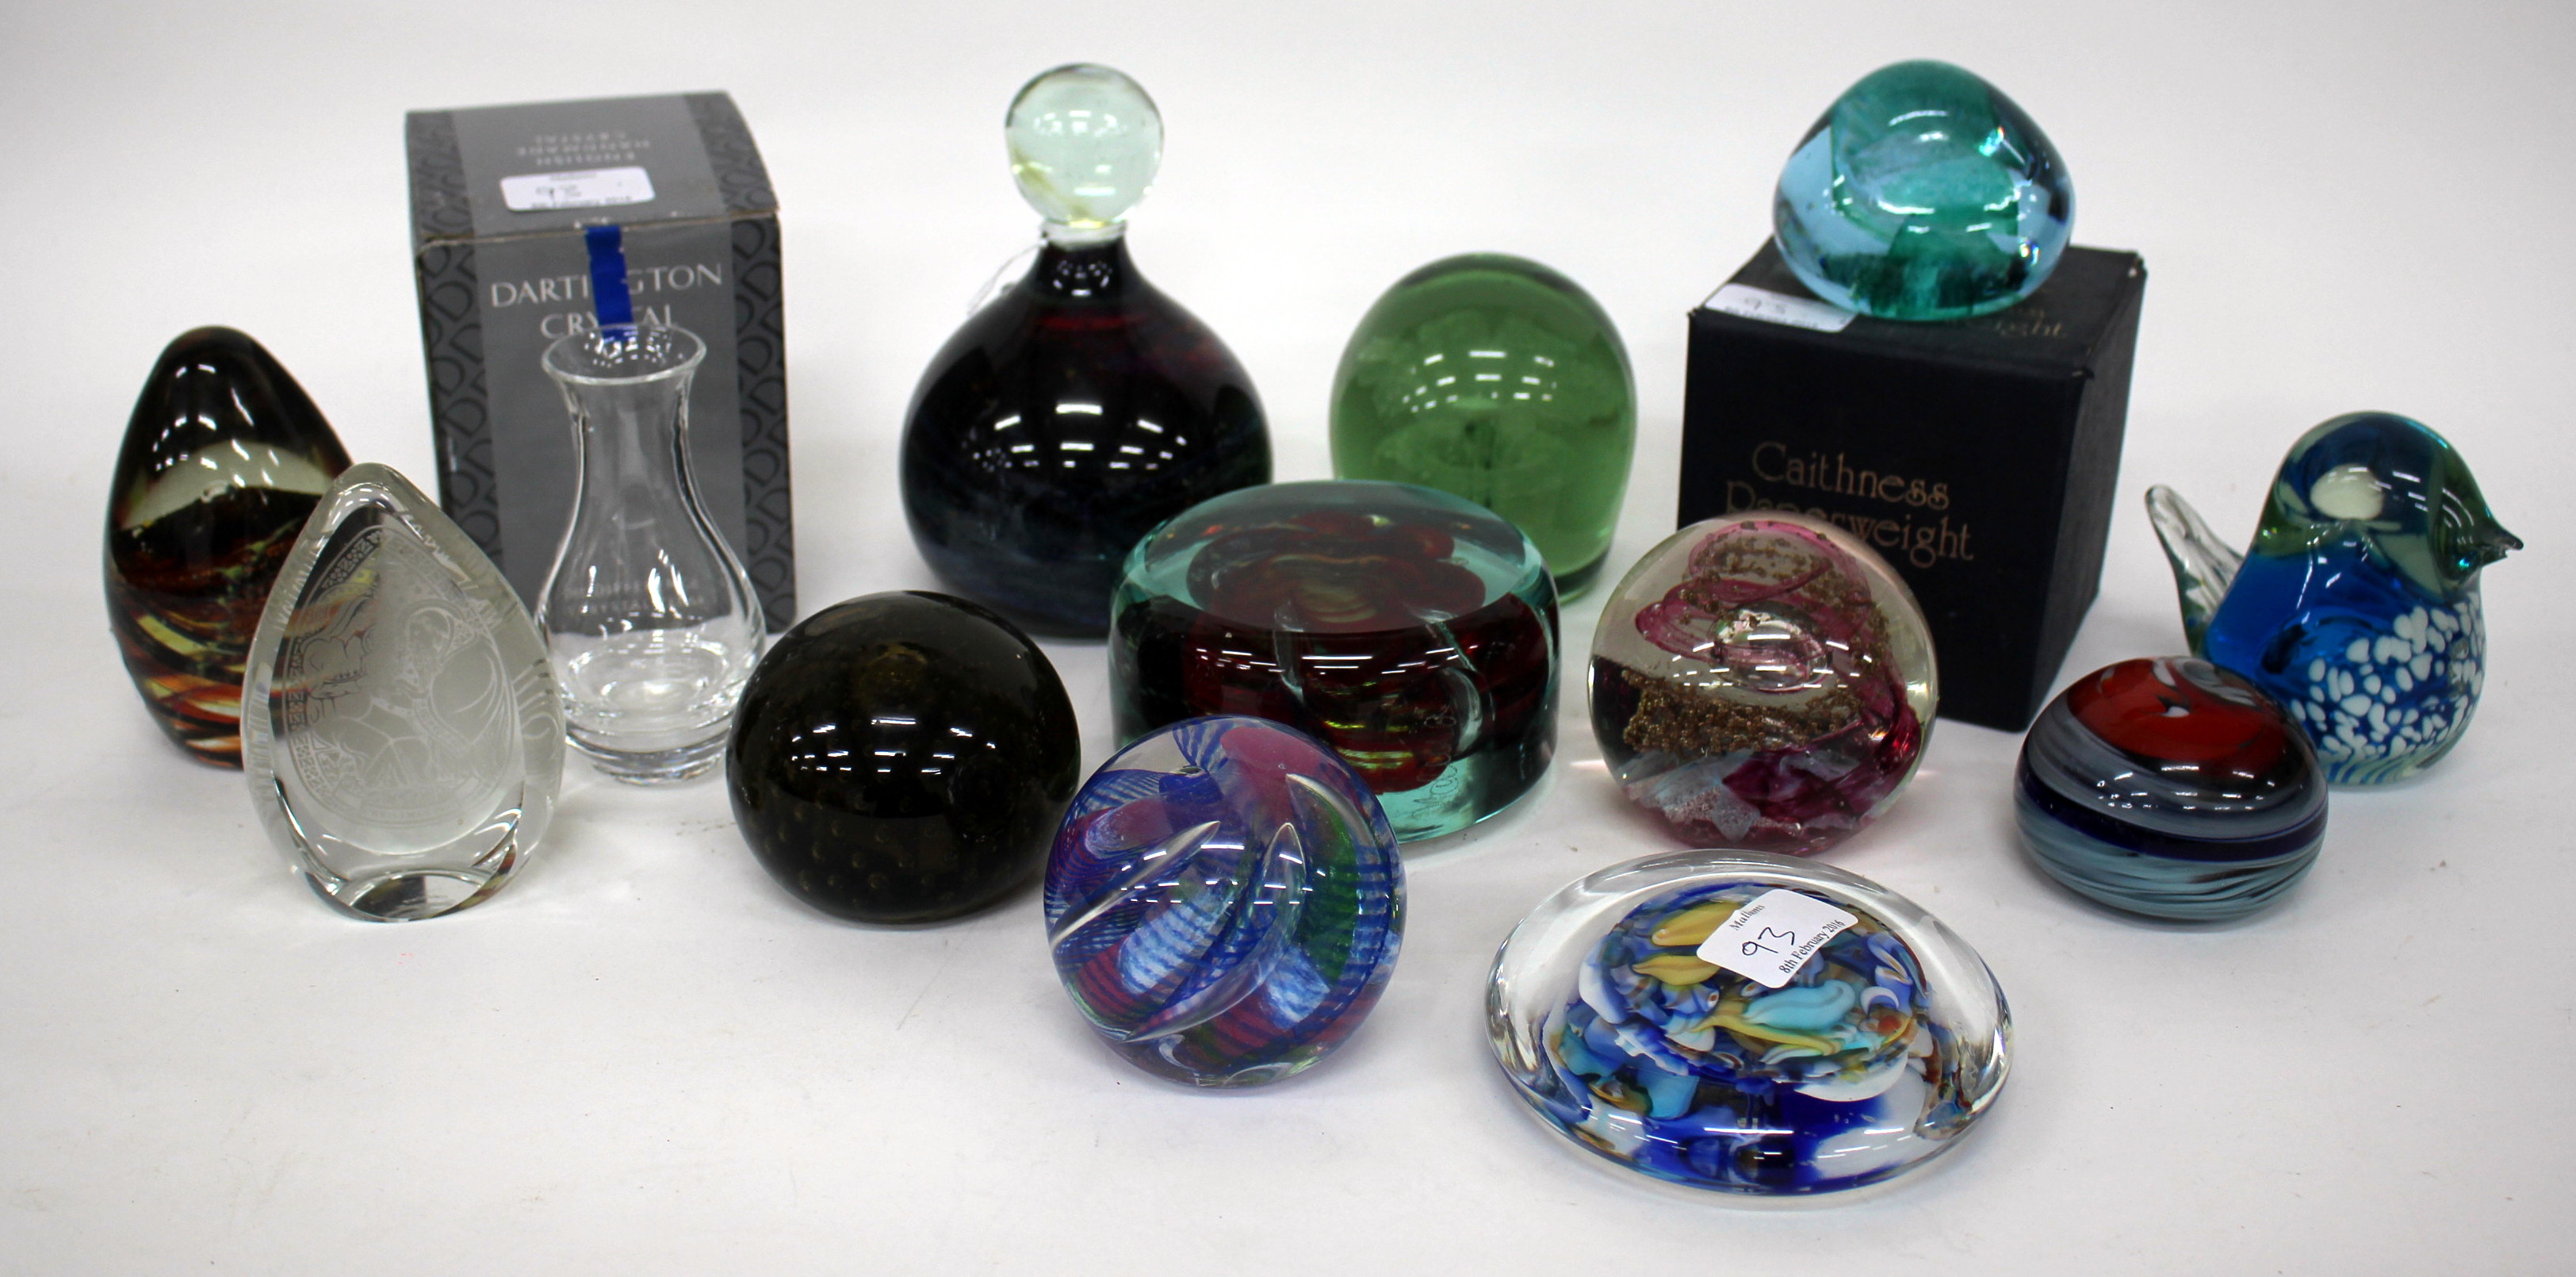 FOUR MDINA GLASS PAPERWEIGHTS, two Caithness paperweights and further glass paperweights